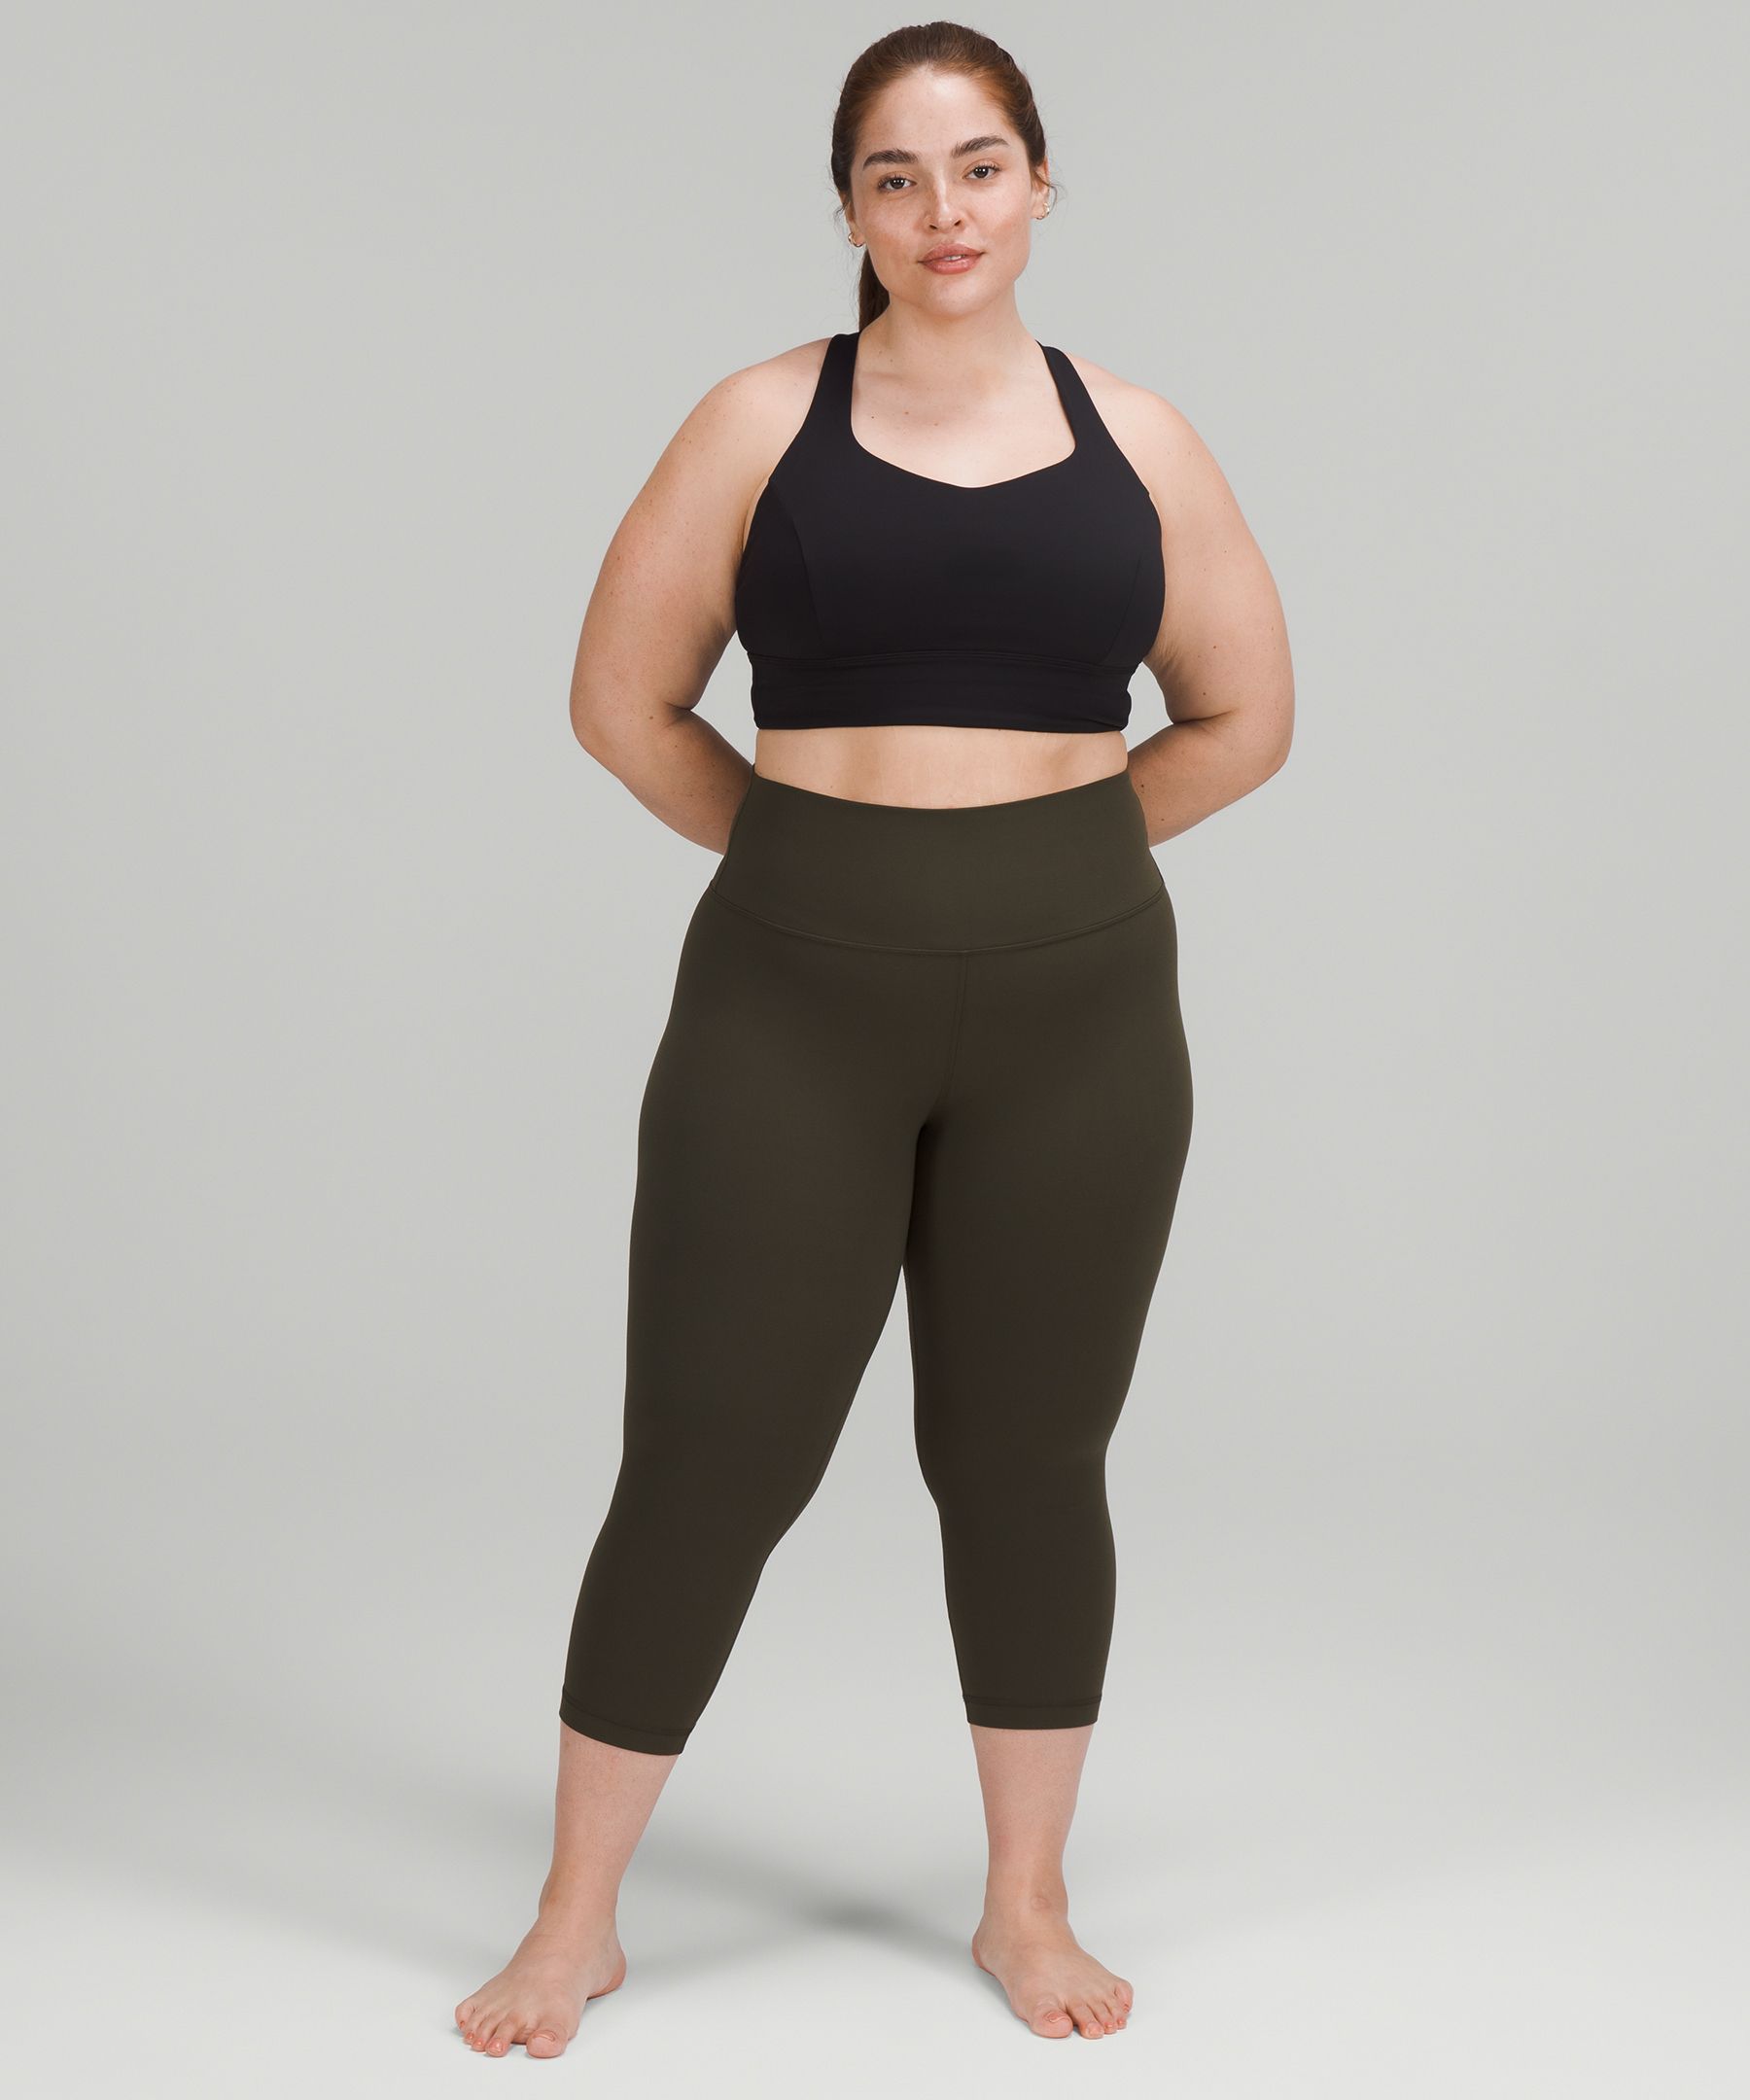 We Compared 13 of the Best Lululemon Leggings, So You Know Exactly